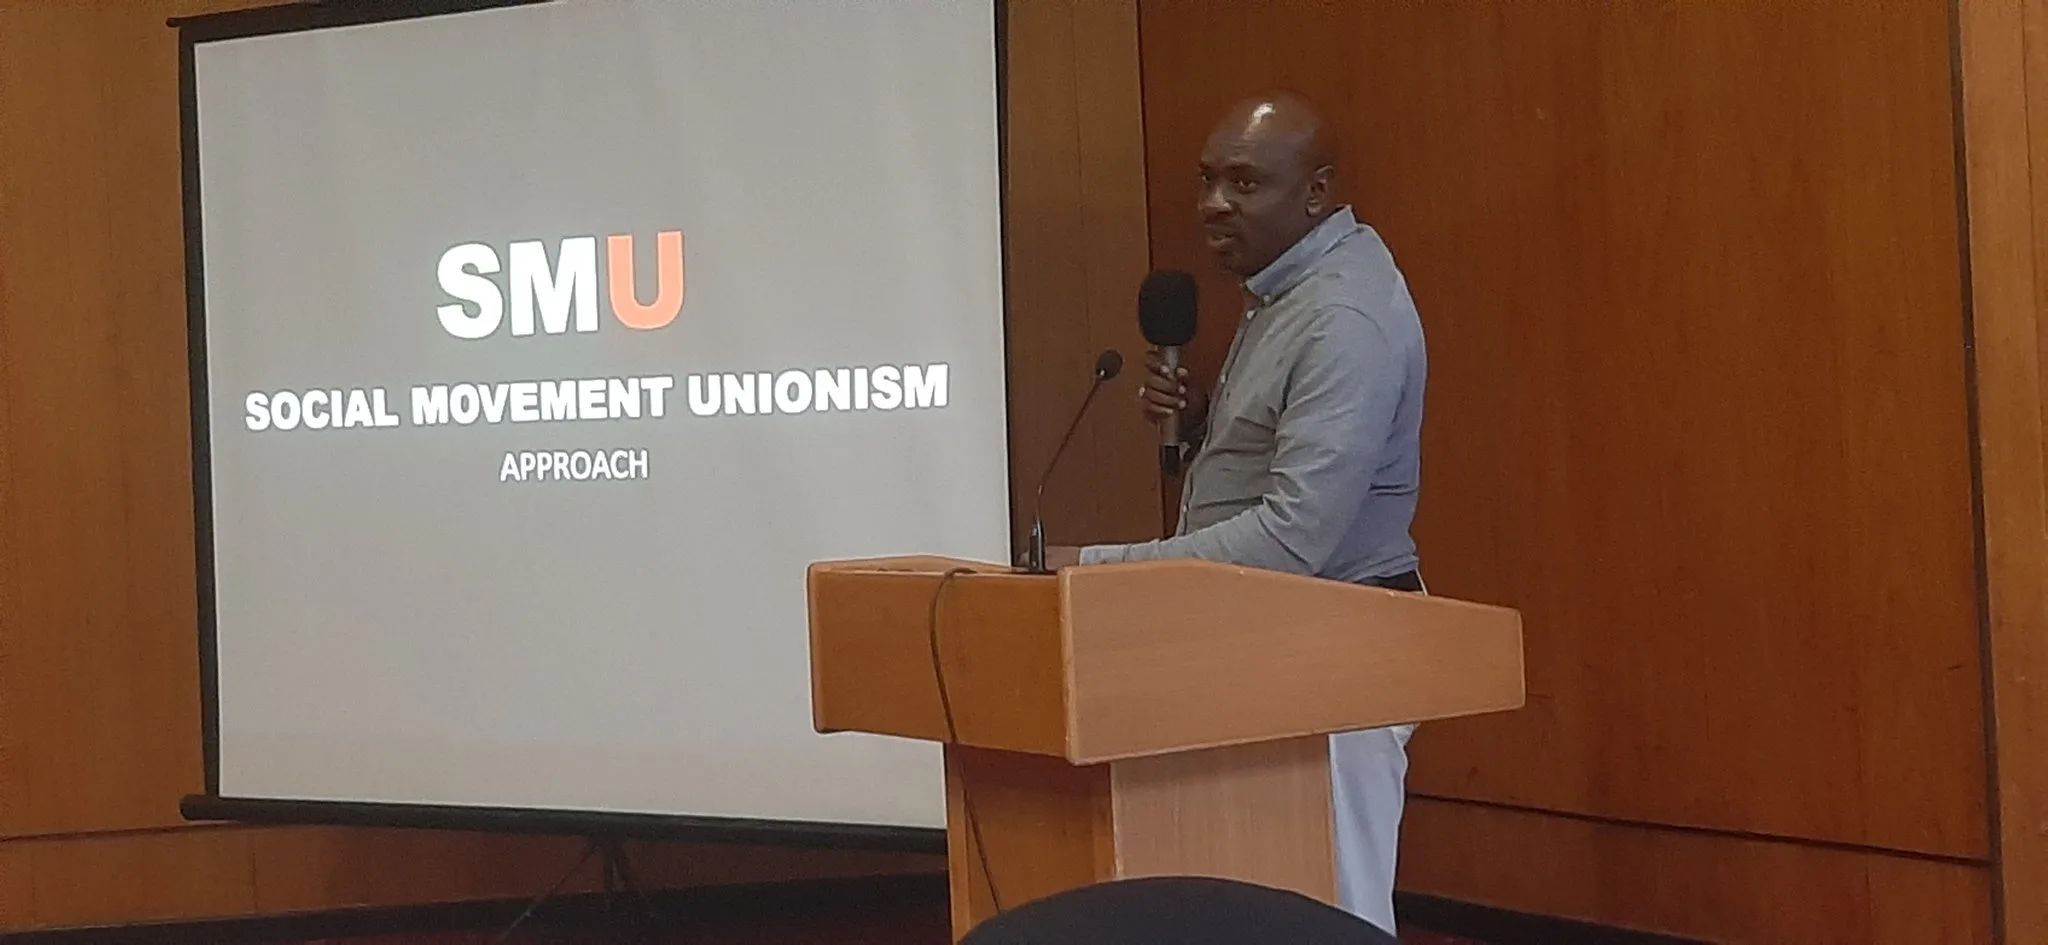 Rwakajara urges labor unions: Unite with social movements for workers’ rights